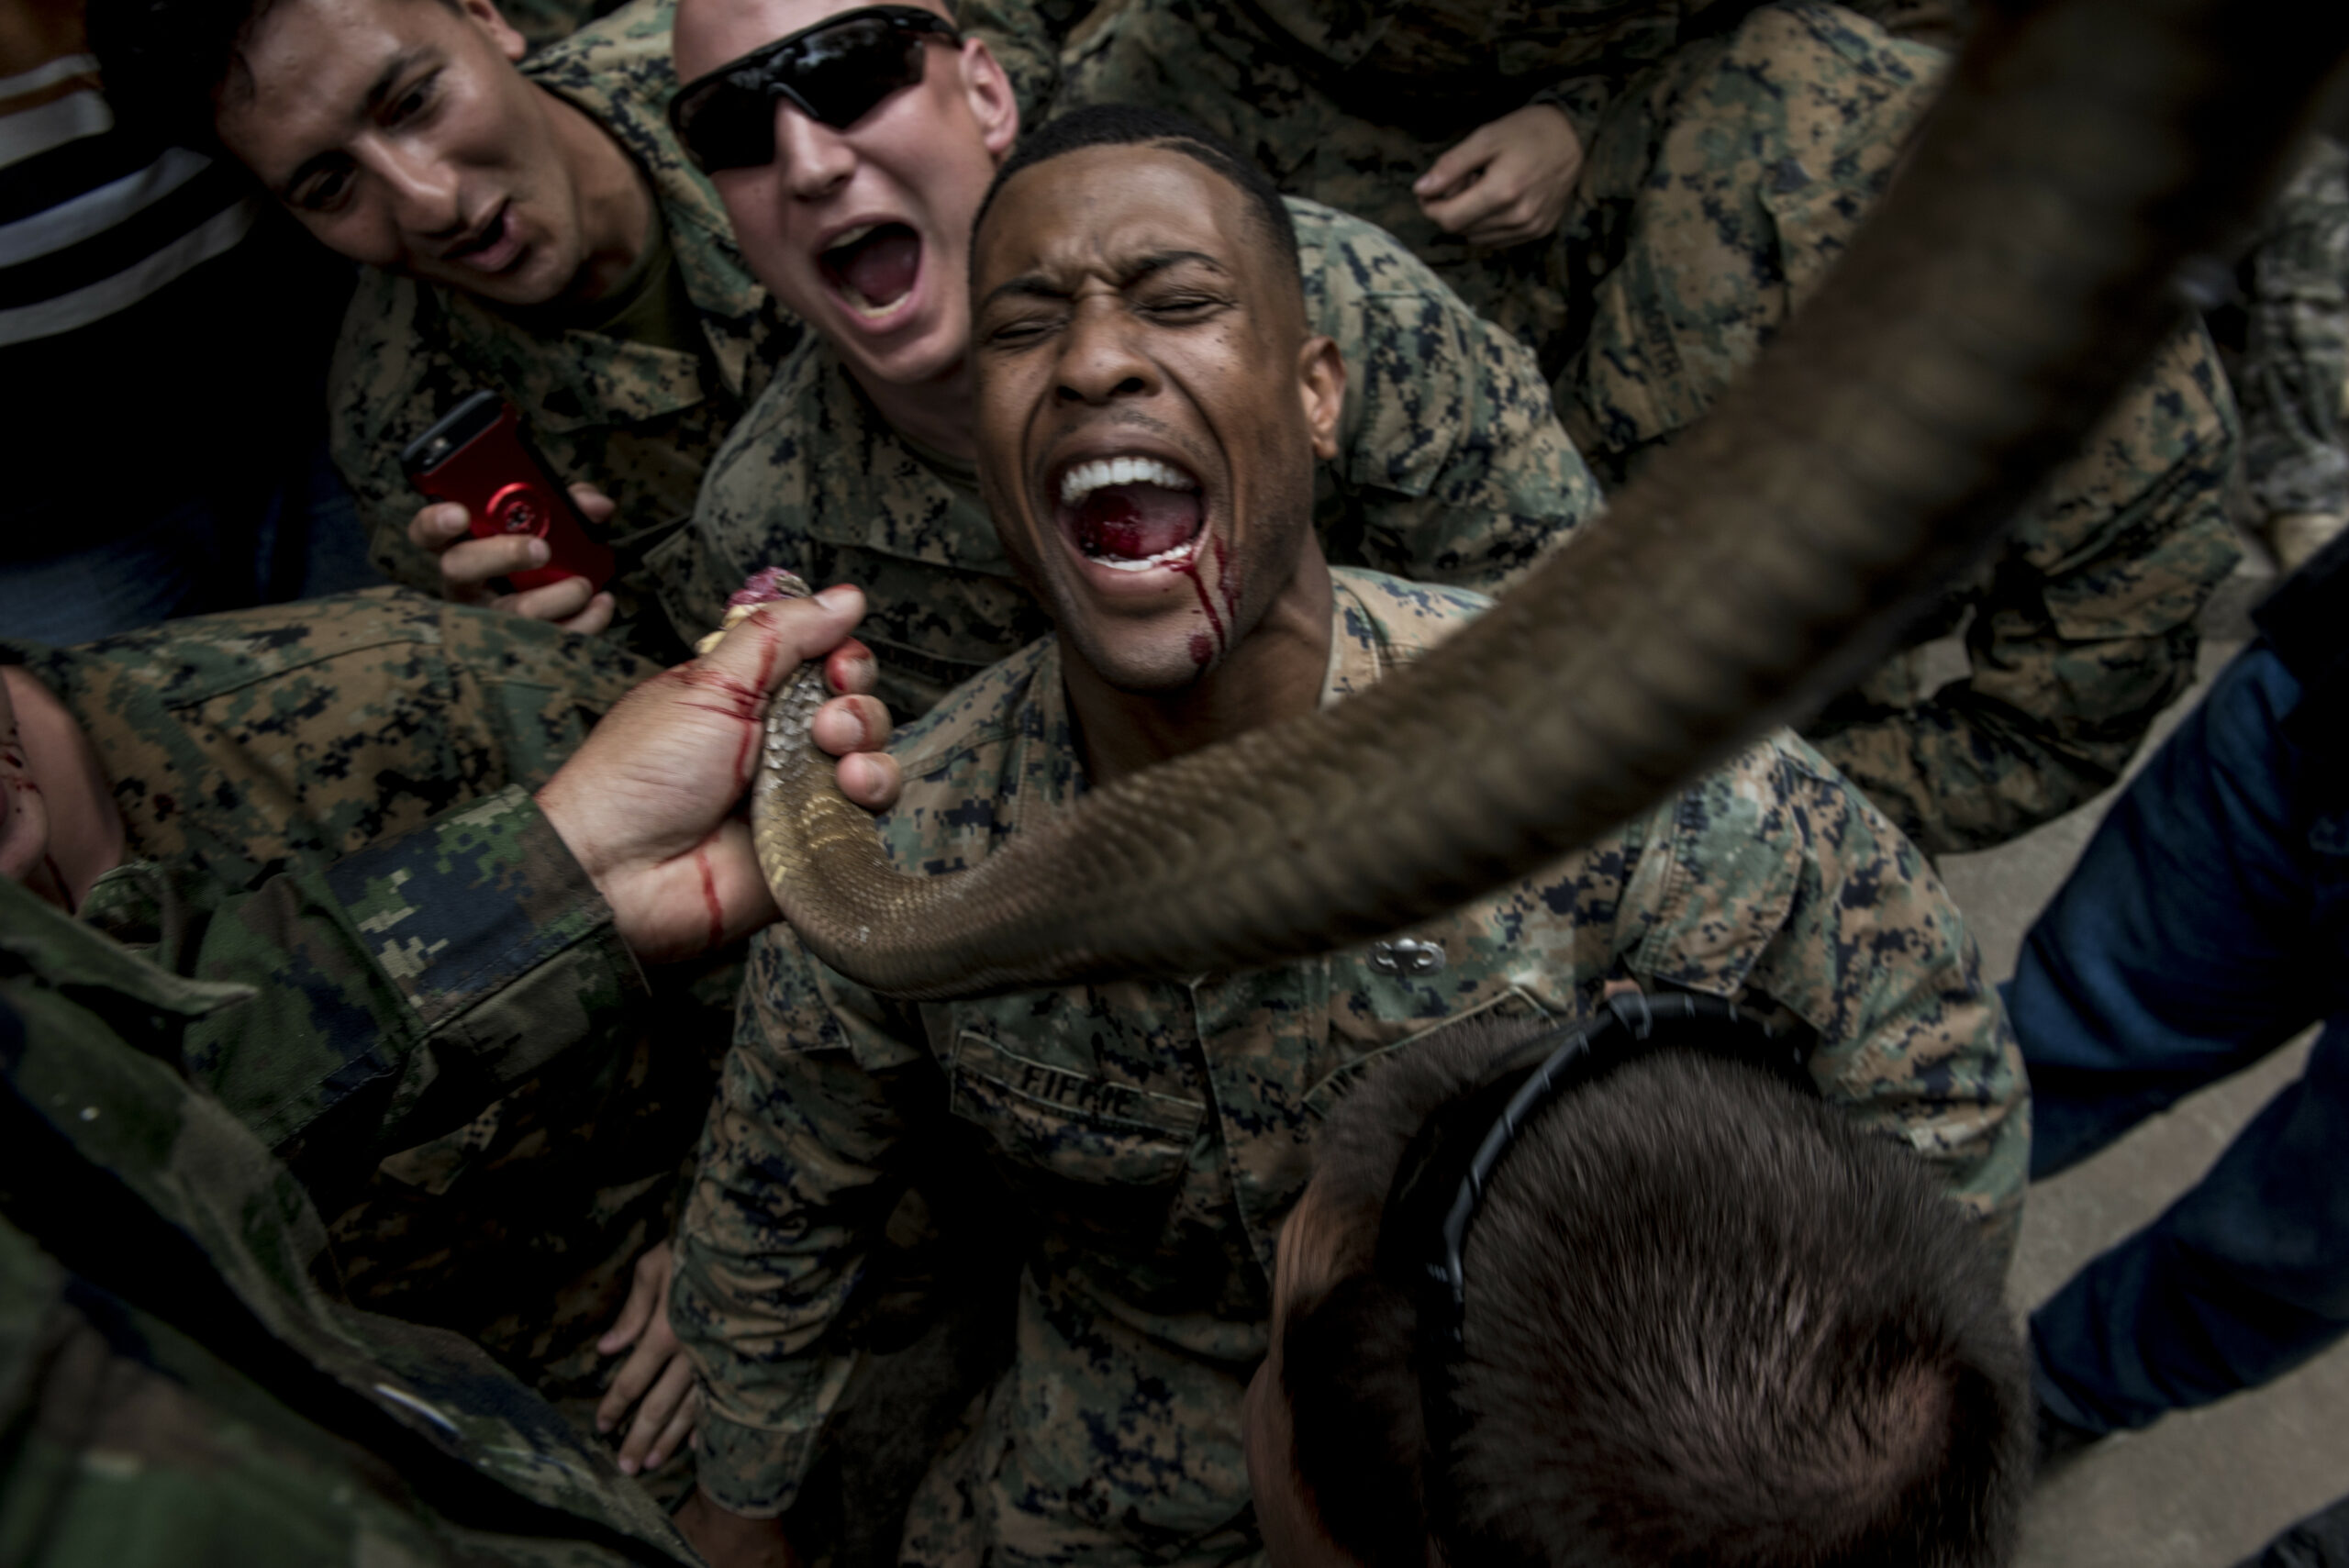 U.S. Marine Corps Sgt. Christopher Fiffie, a reconnaissance Marine from Edgard, La. assigned to 3rd Reconnaissance Battalion, 3rd Marine Division, drinks cobra blood during jungle survival training Feb. 19, 2018, in Sattahip, Chonburi province, Thailand. The training was conducted as part of Exercise Cobra Gold 2018. In a survival scenario snake blood can be consumed to keep an individual hydrated while the meat can be used as a source of nutrition. The annual exercise is conducted in the Kingdom of Thailand held from Feb. 13-23 with seven full participating nations. (U.S. Air Force photo by Staff Sgt. Micaiah Anthony)